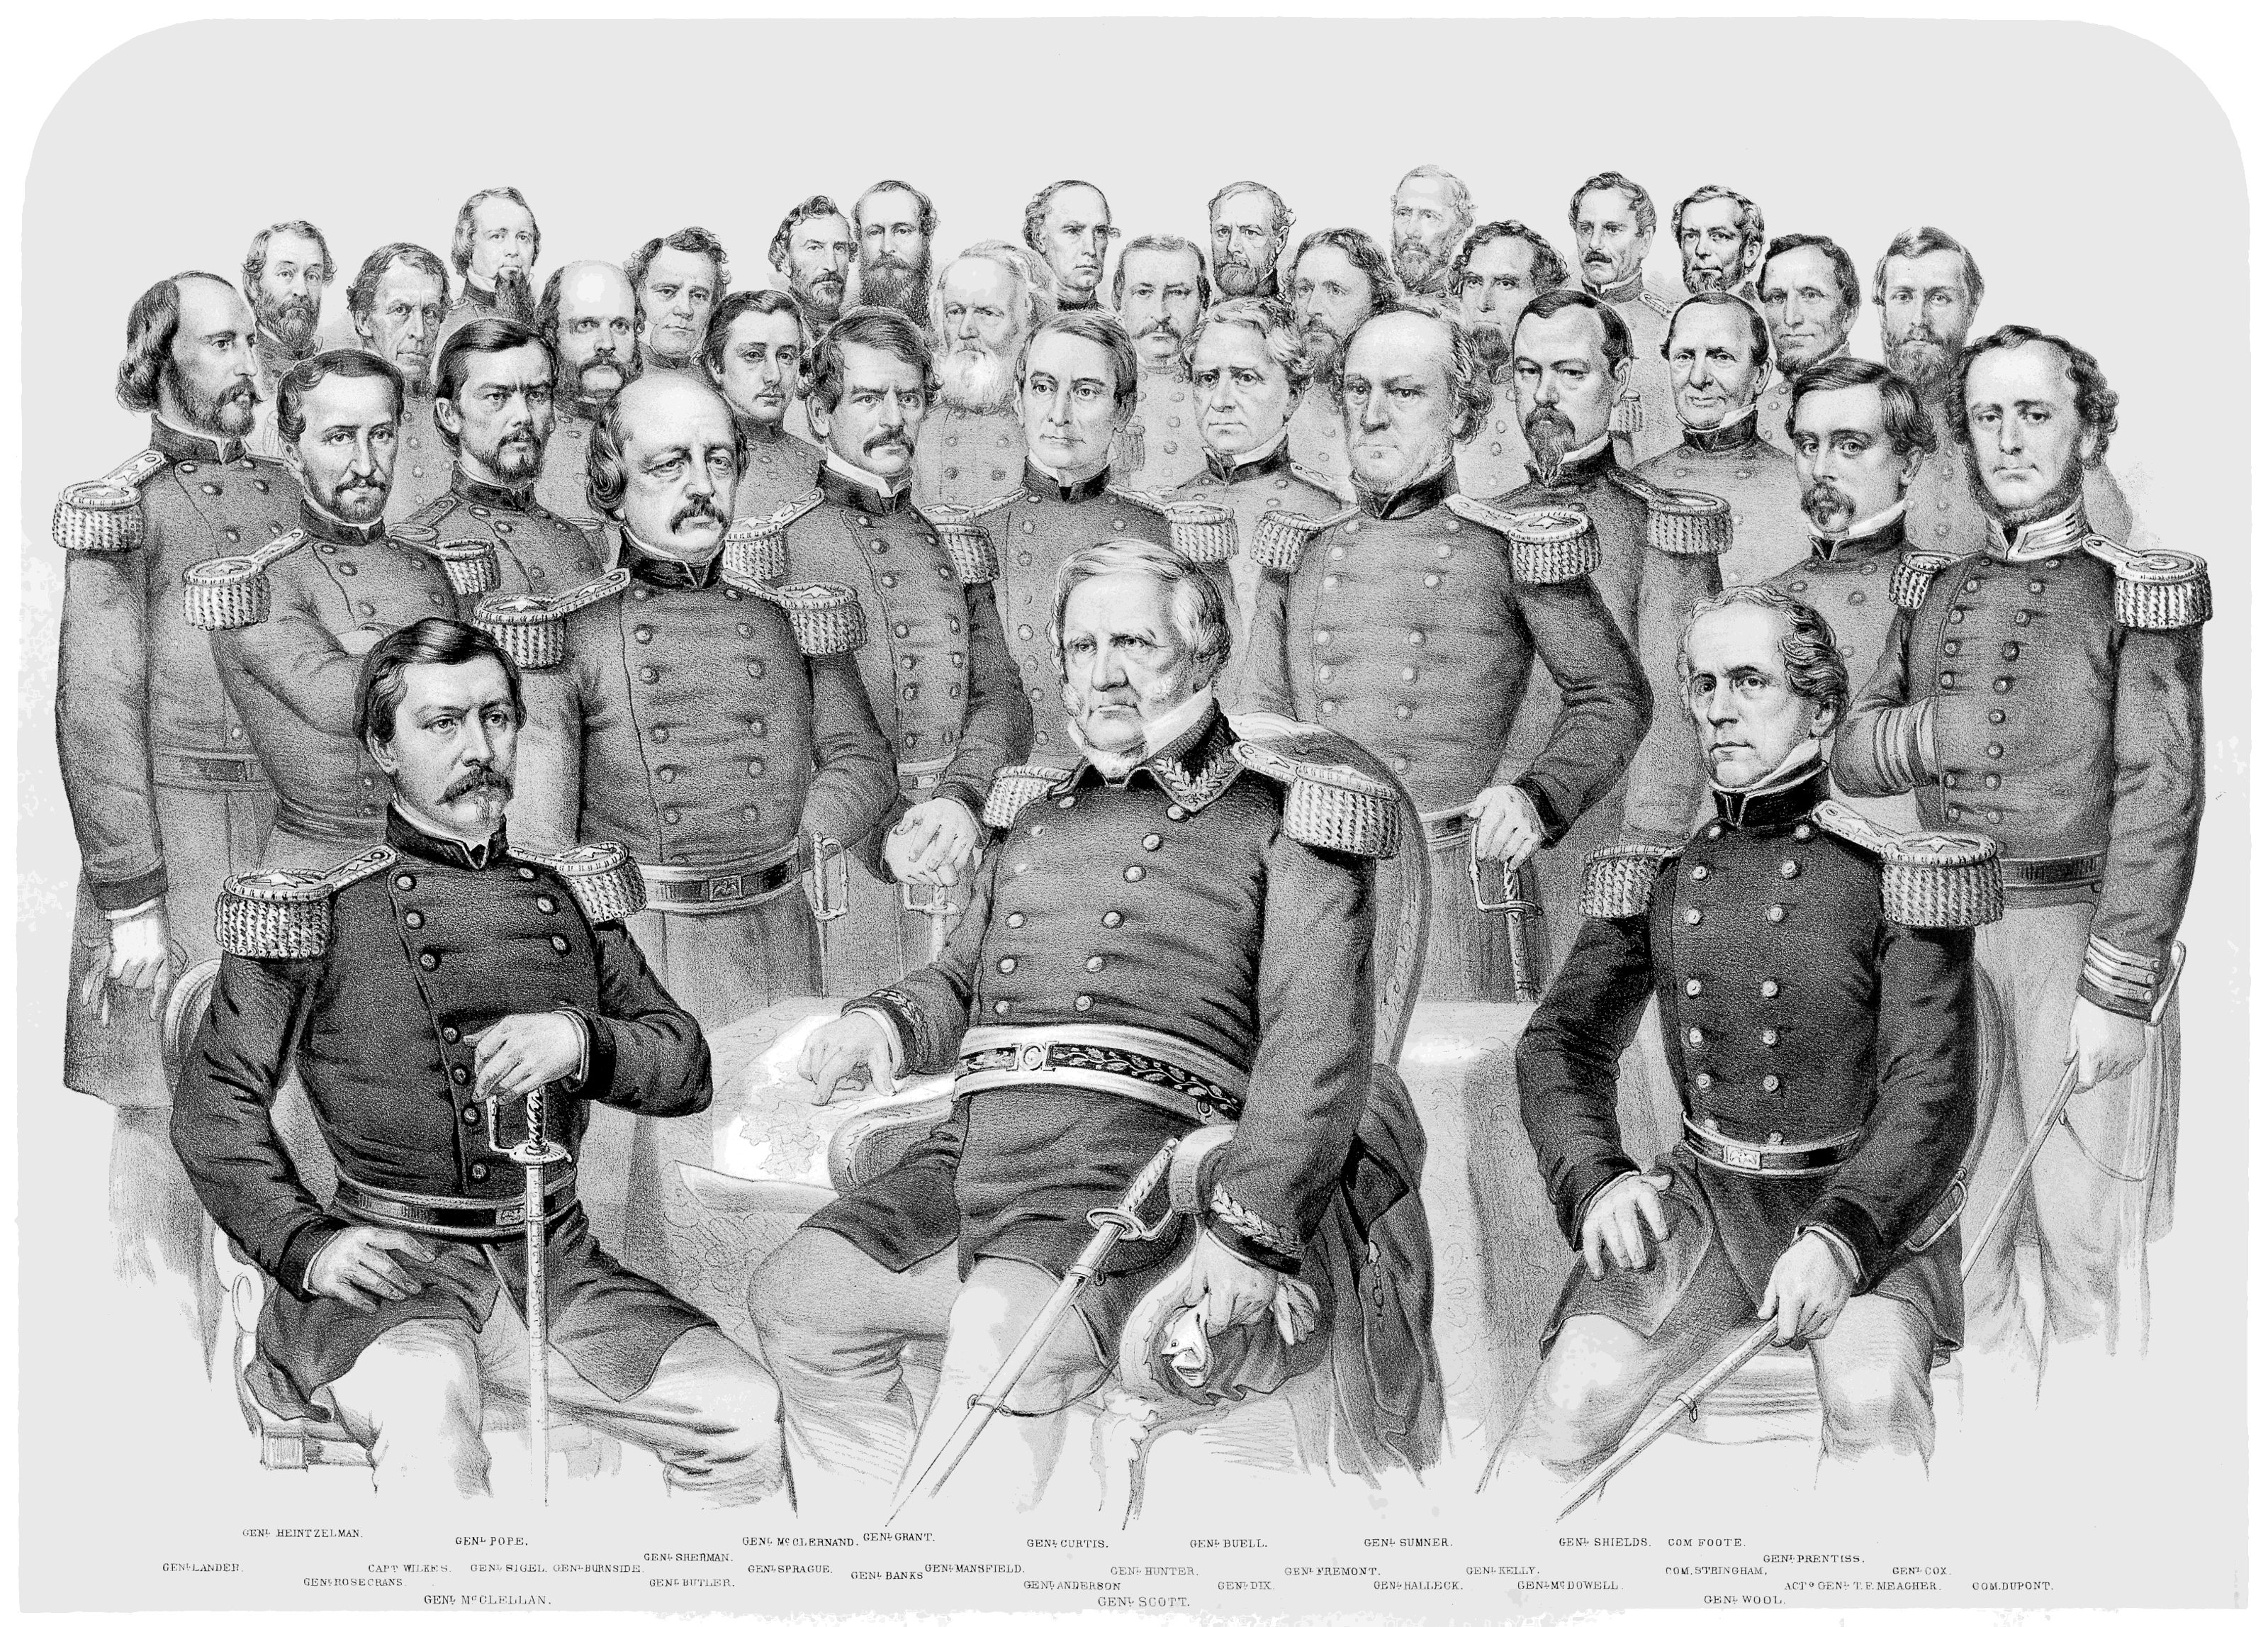 champions of the Union 1861